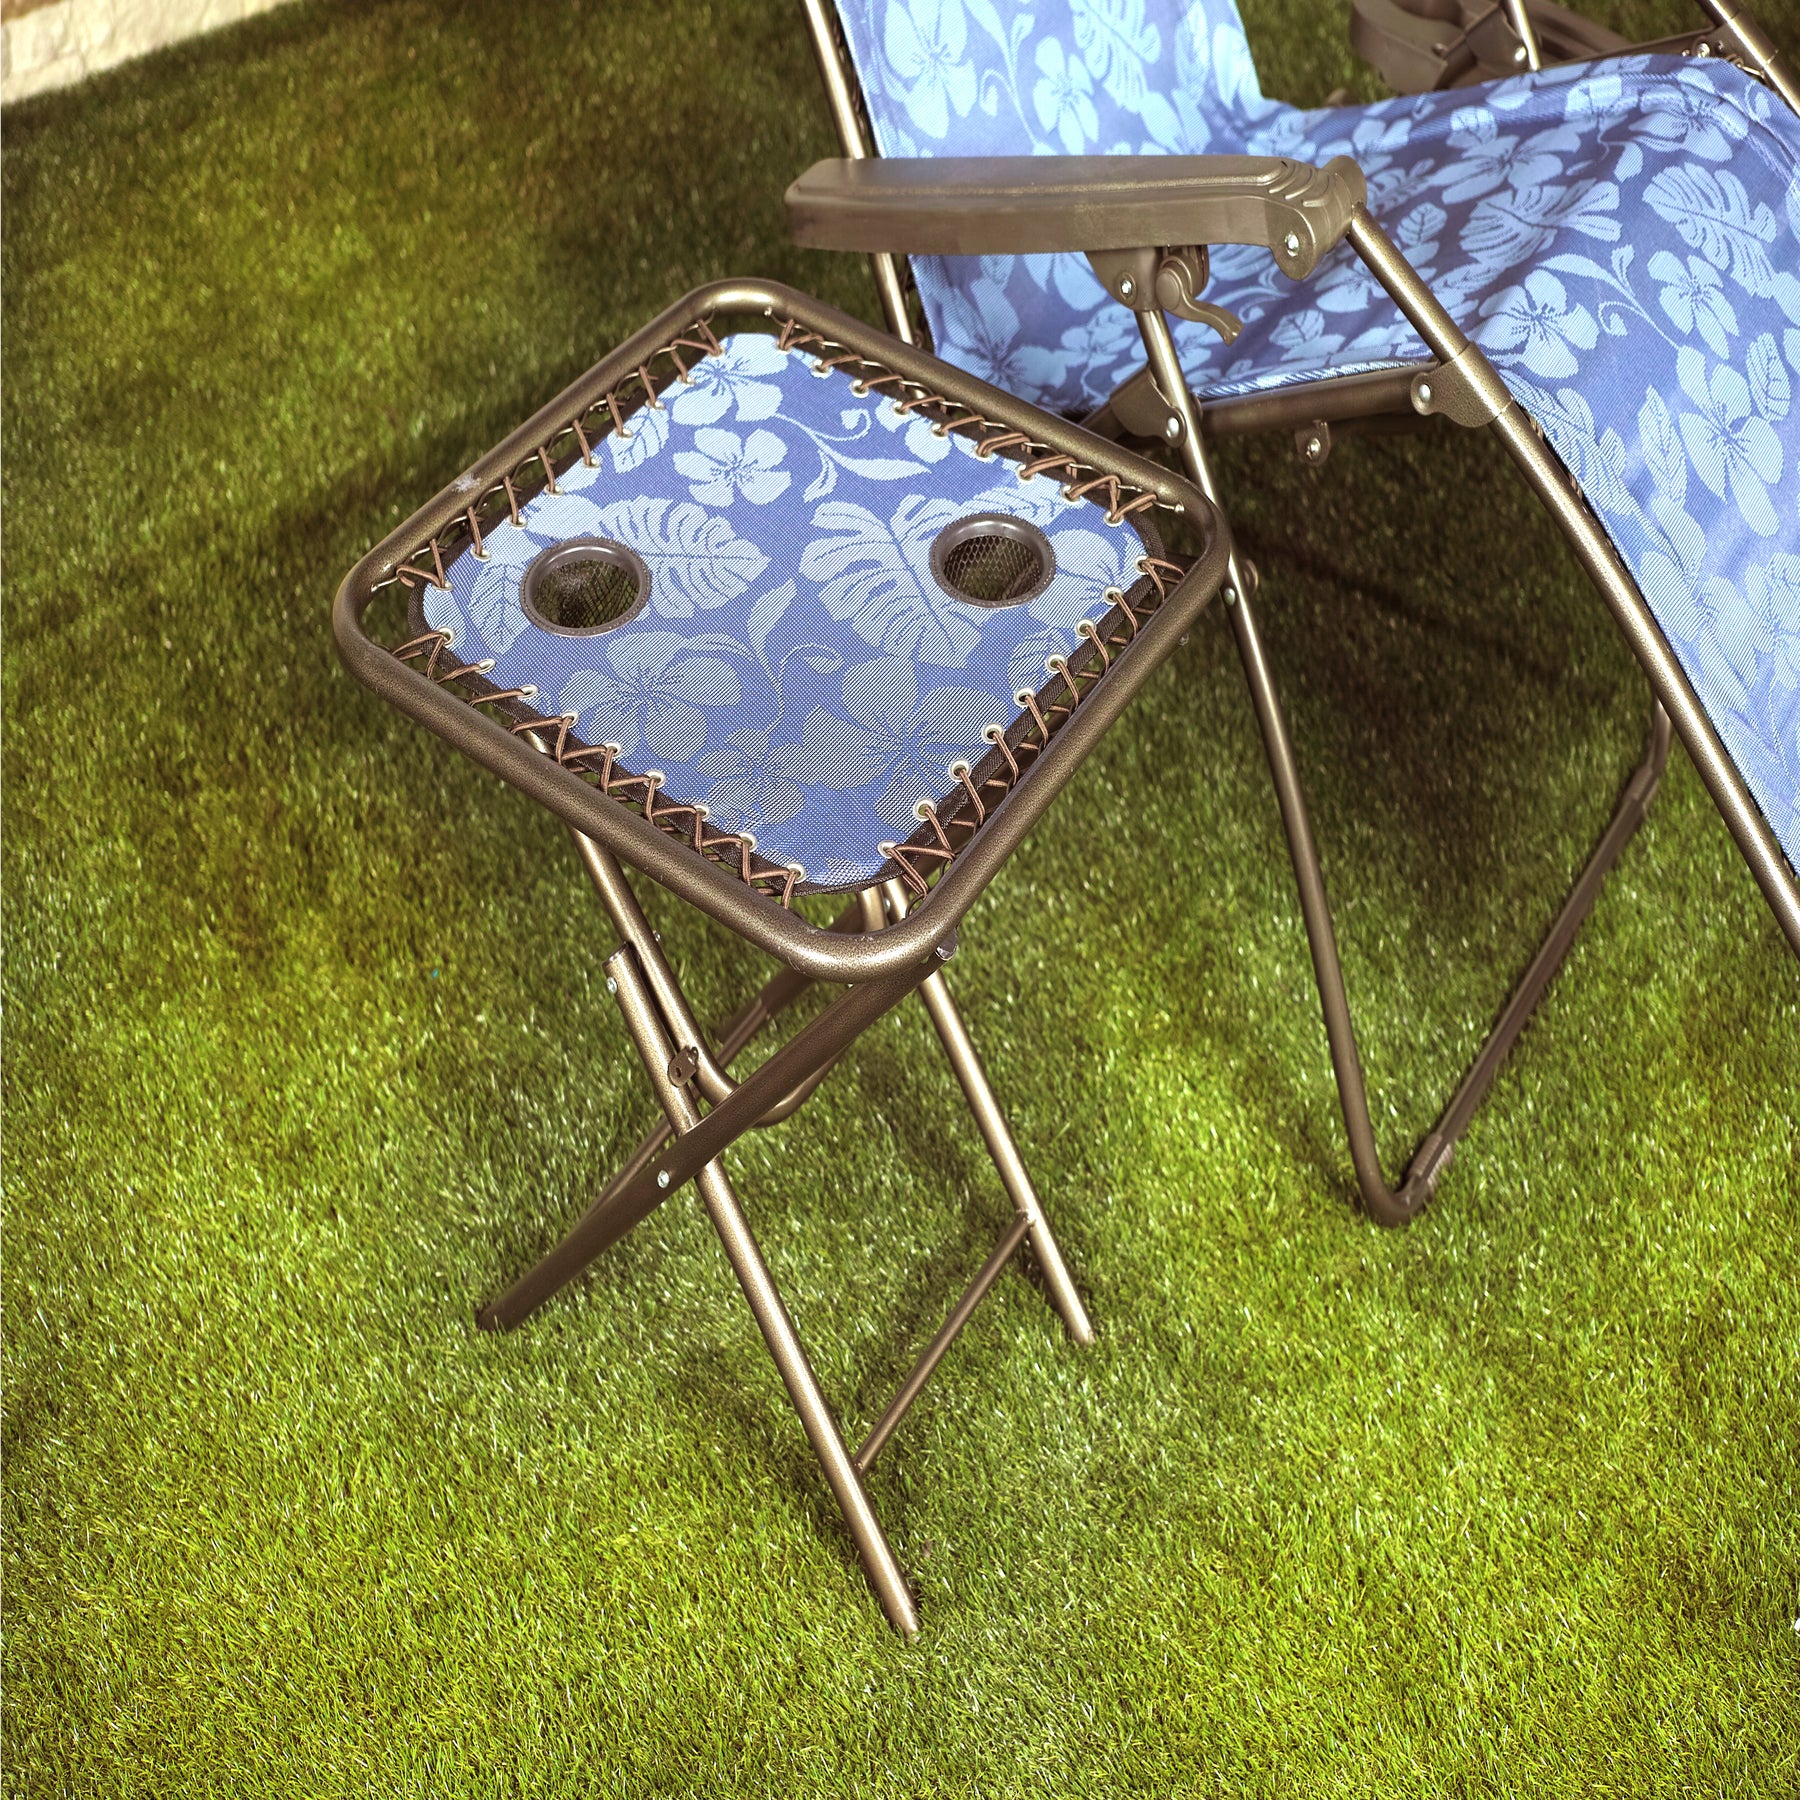 Bliss Hammocks 20-inch Folding Side Table with 2 Built-In Cup Holders in the blue flowers variation in the grass next to a gravity free chair.